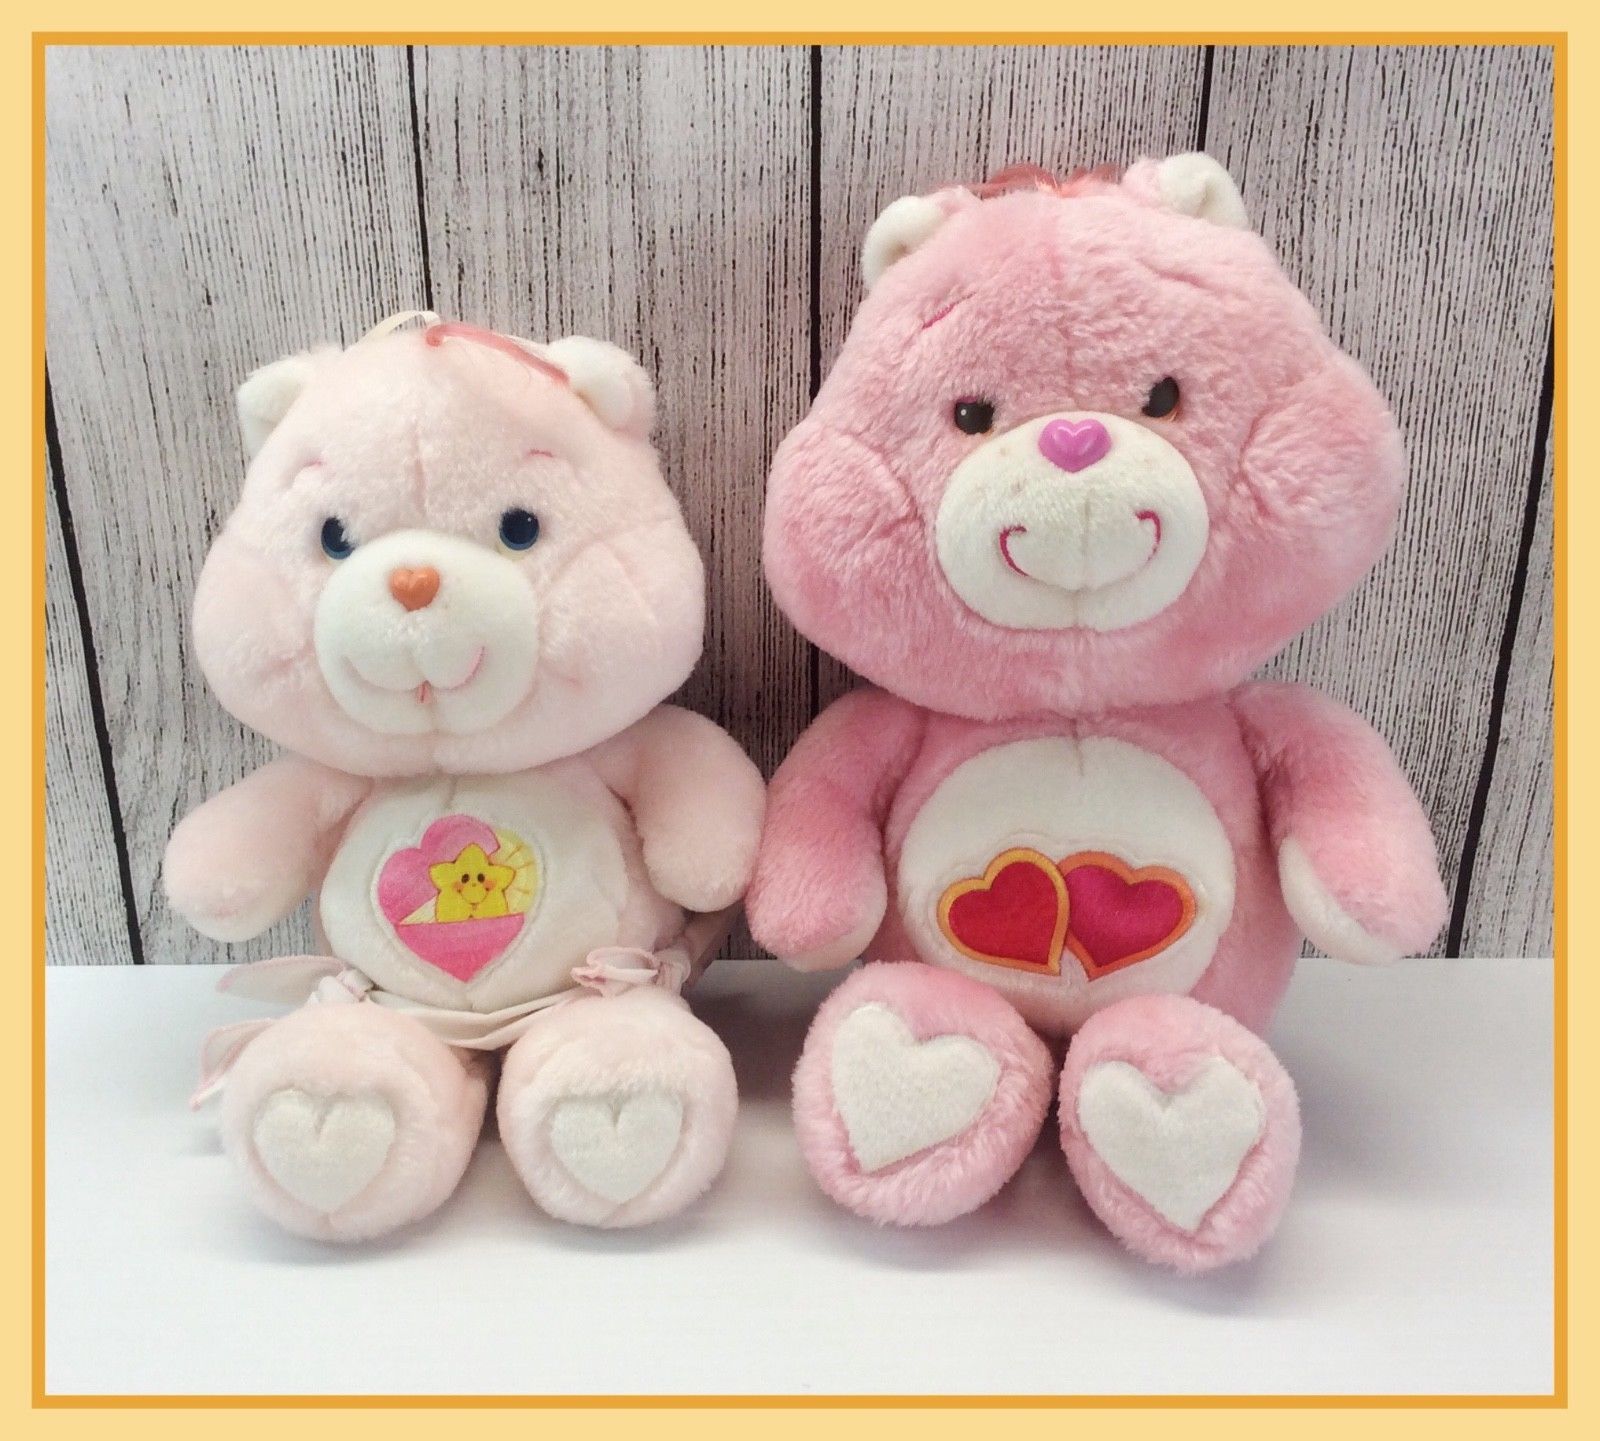 1983 Vintage Kenner Care Bears LOVE A LOT & BABY HUGS Full Size Plush Animals